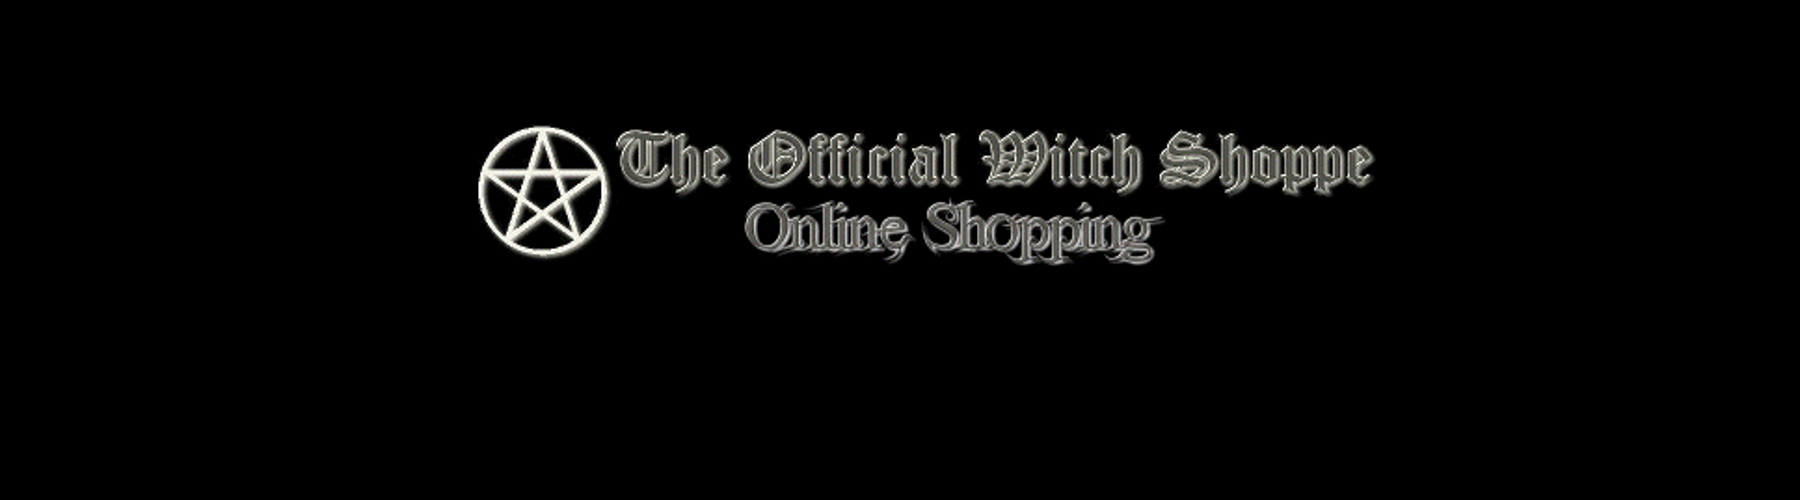 The Official Witch Shoppe Online Shopping